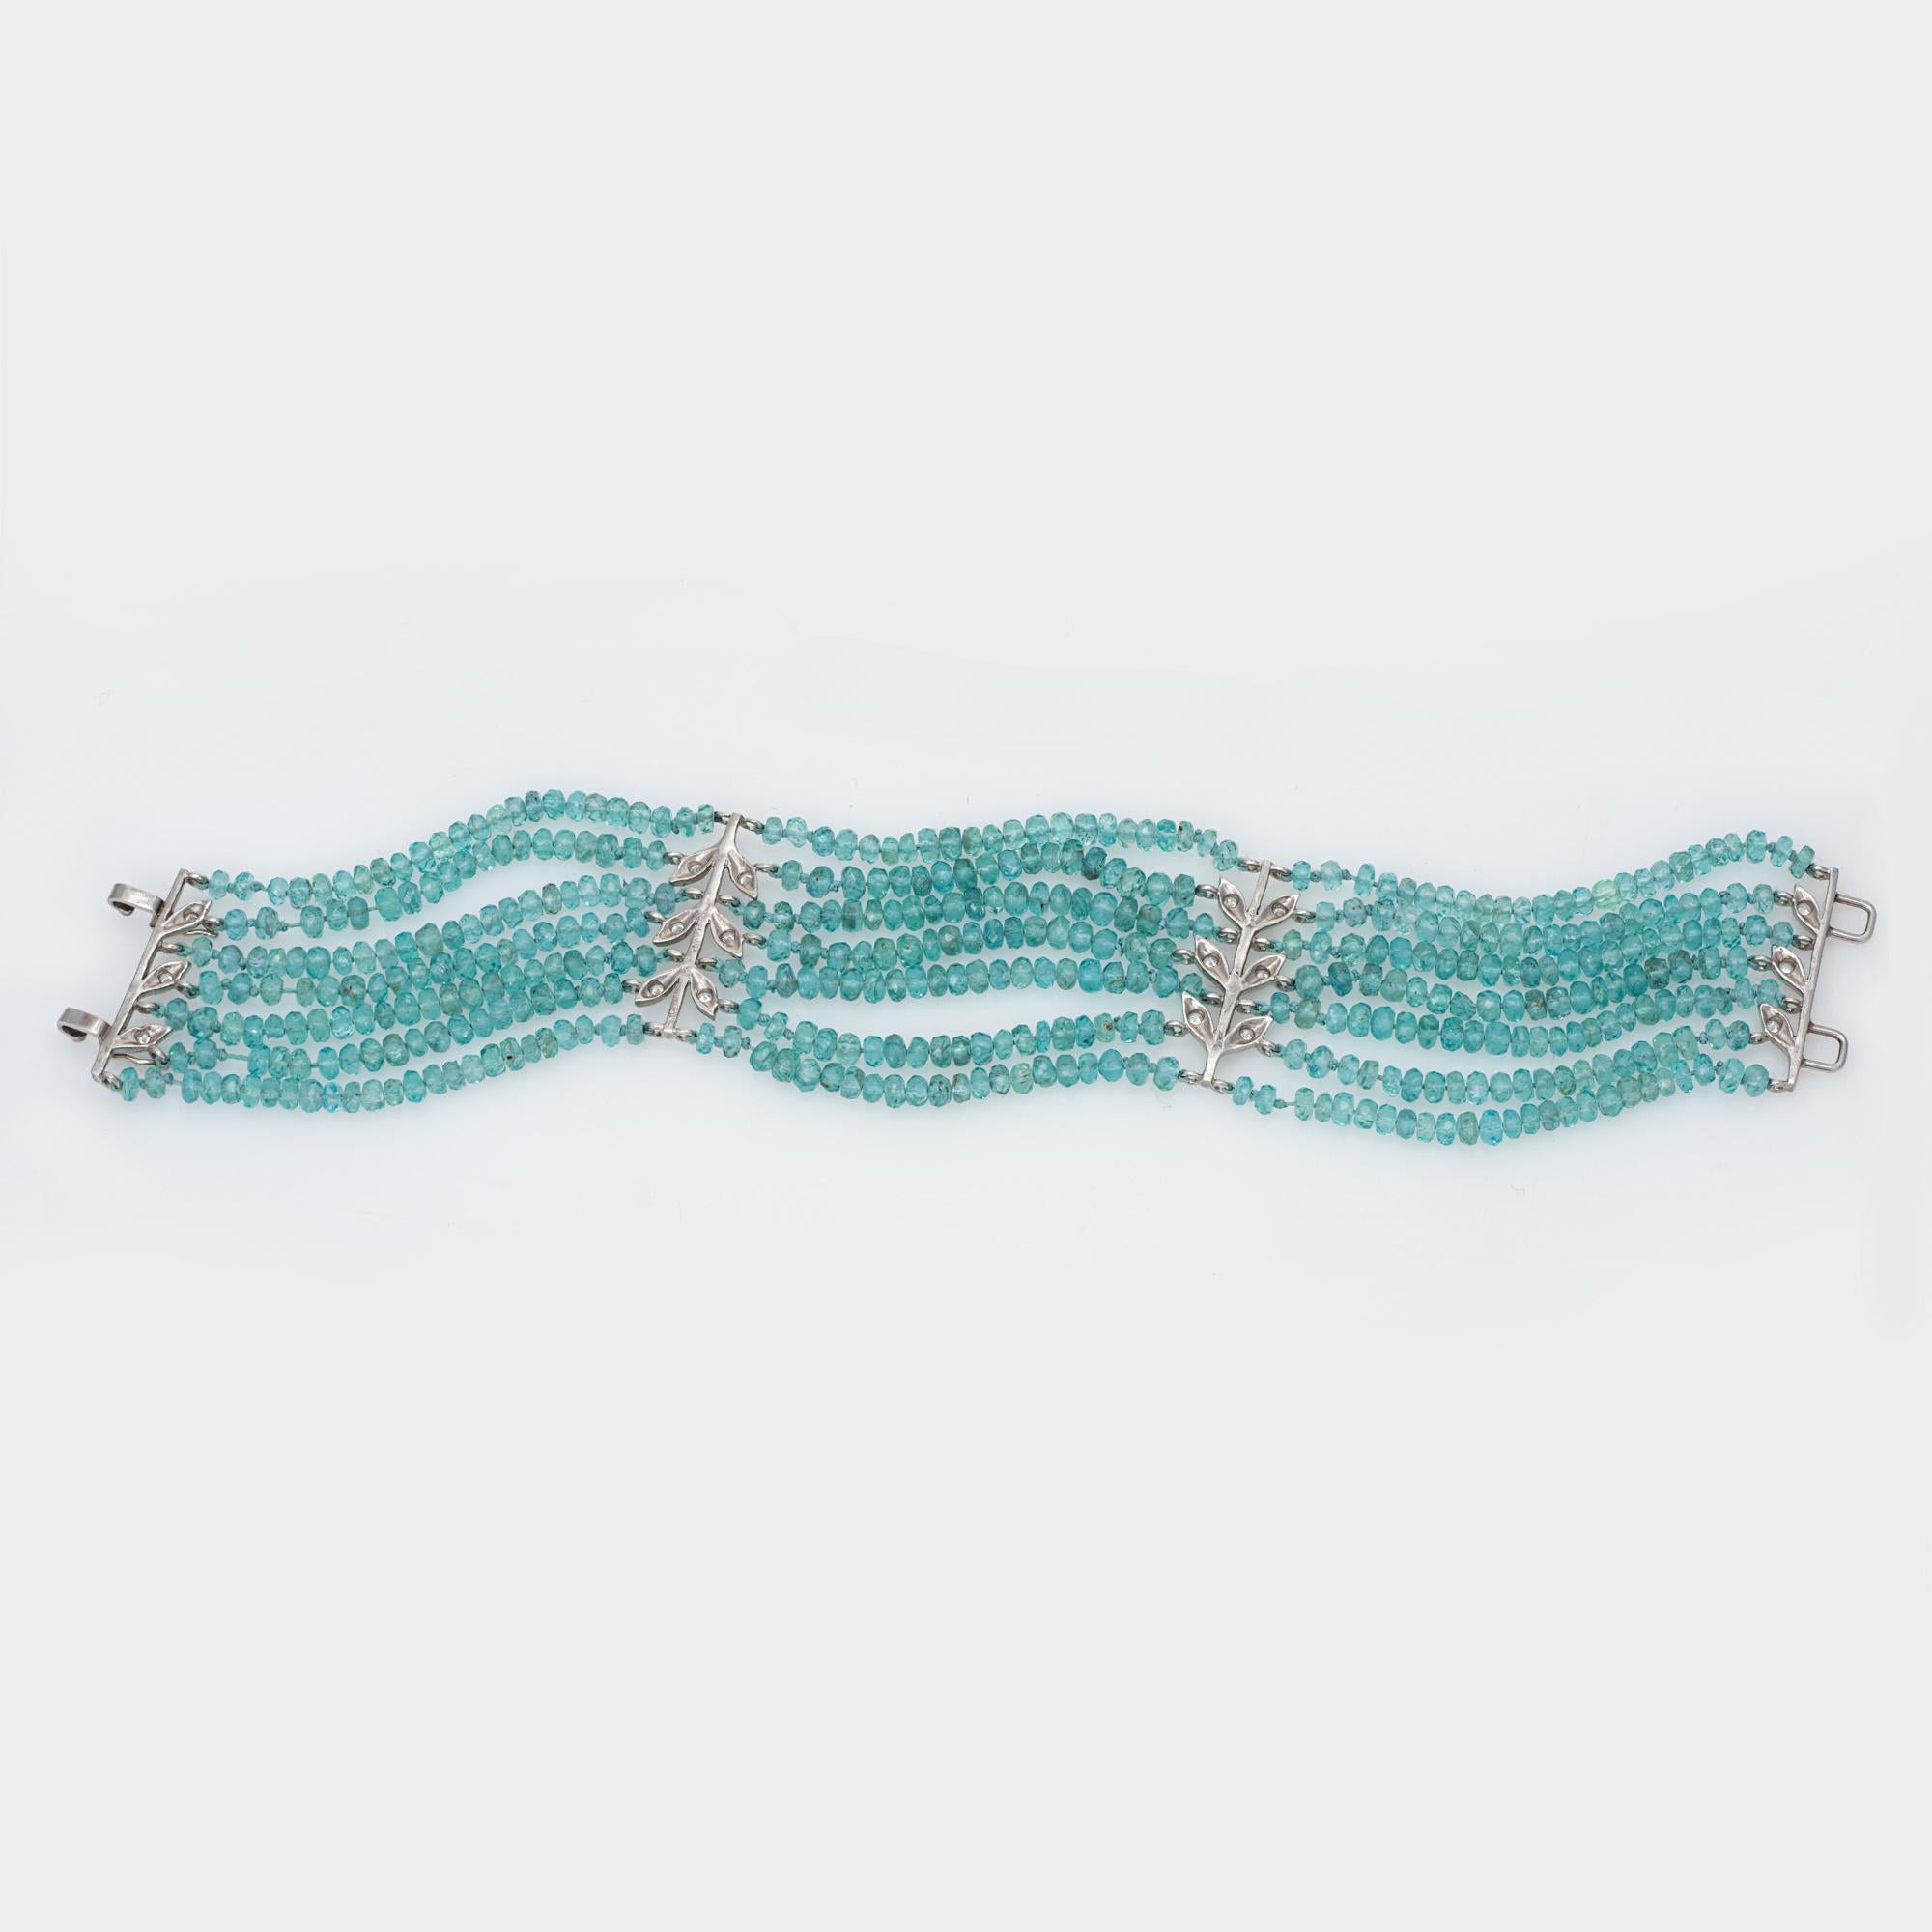 Finely detailed pre-owned Cathy Waterman 7 strand aquamarine & diamond bracelet crafted in 900 platinum. 

Seven strands of faceted aquamarine measure (average) 3mm. The diamonds total an estimated 0.18 carats (estimated at H-I color and VS2-SI1